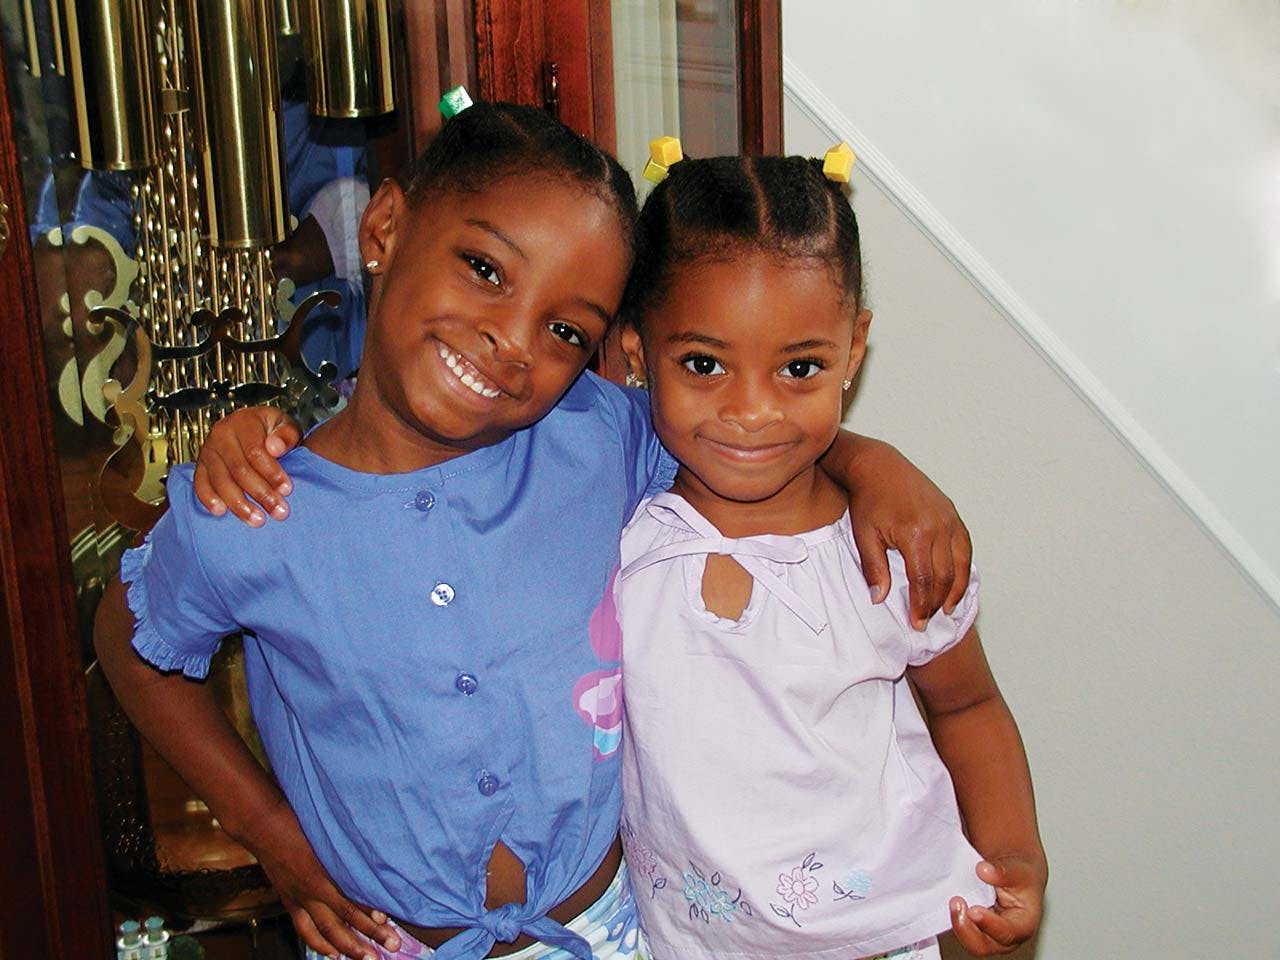 Six-year-old Simone Biles smiles with her arm around her sister. 